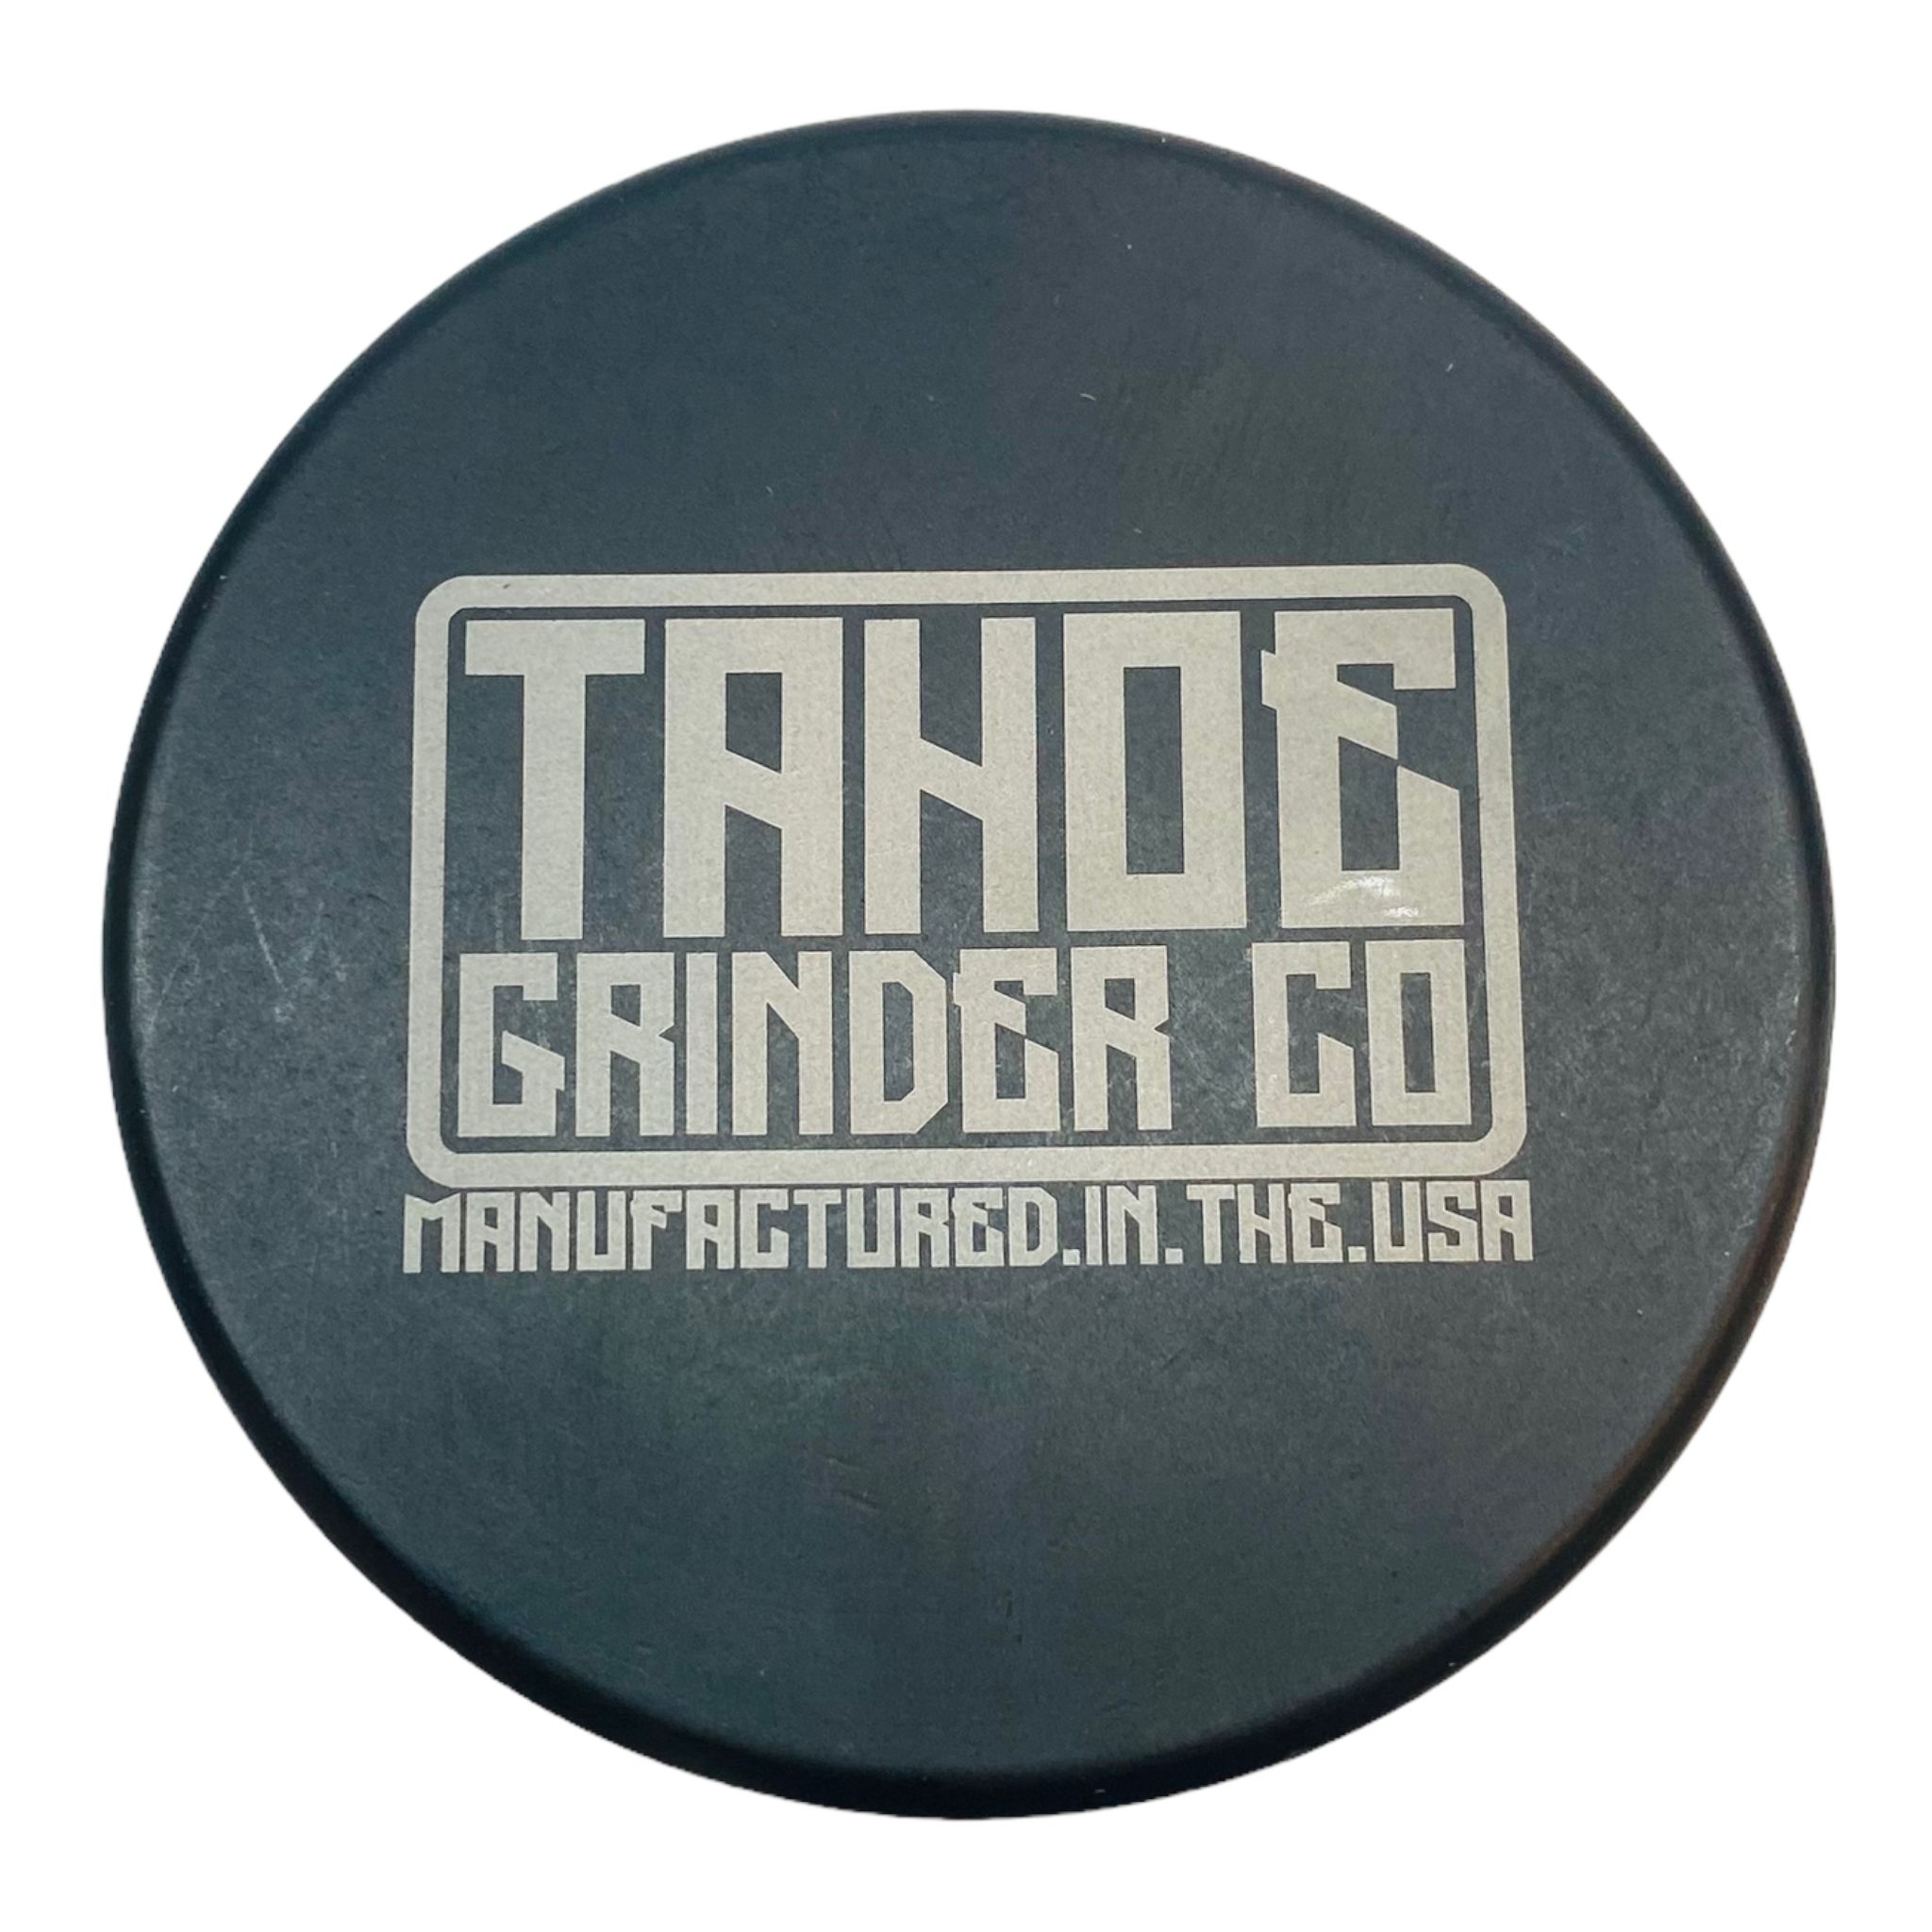 Tahoe Grinders Black Anodized Aluminum Large Two Piece Weed Grinder With VW Bus On Beach